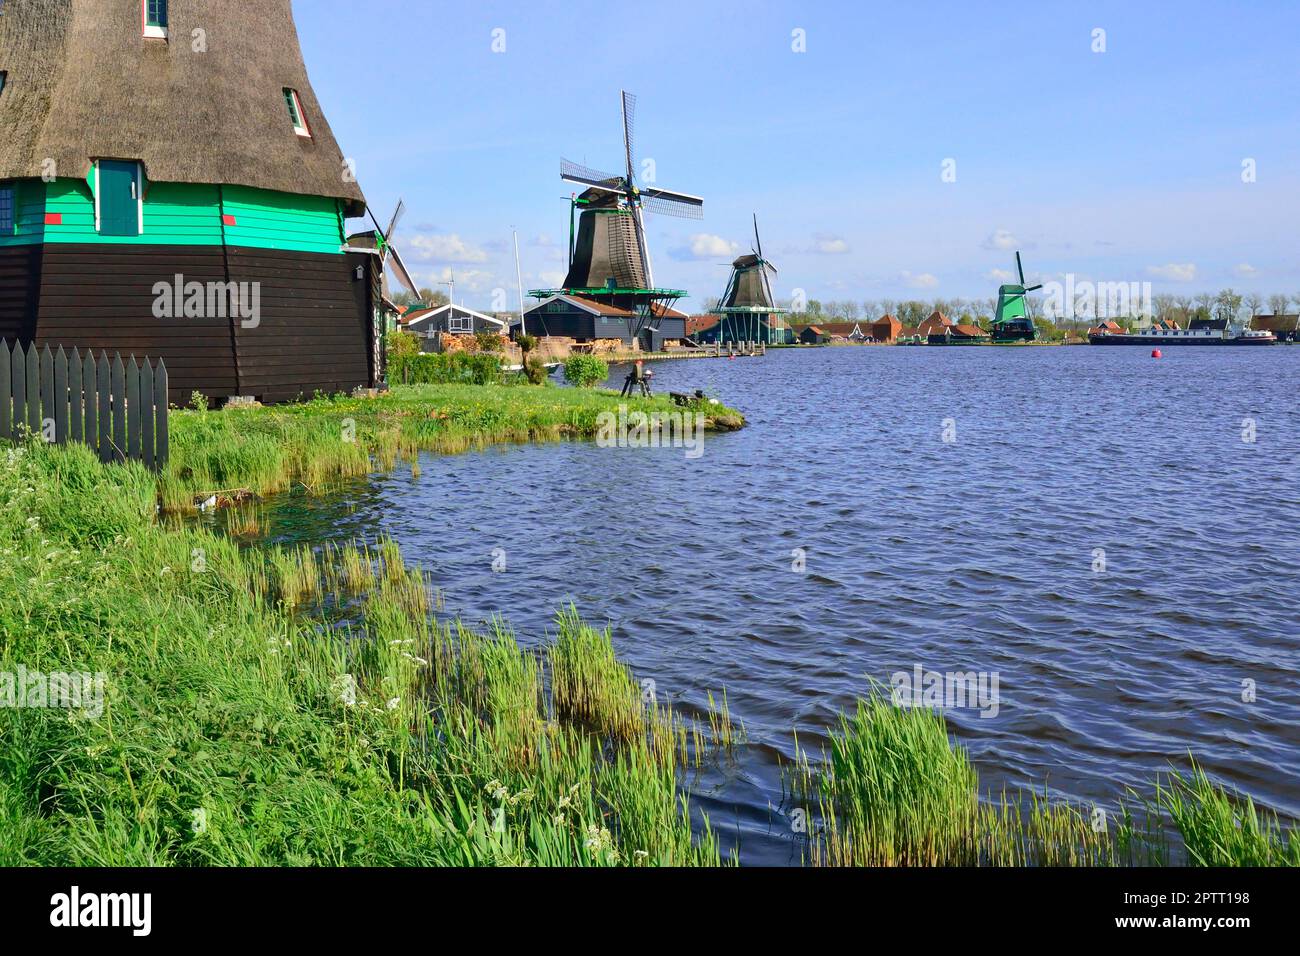 The Zaanse Schans houses seven museums — the Weavers House, the Cooperage, the Jisper House, Zaan Time Museum, Albert Heijn Museum Shop and the Bakery Stock Photo